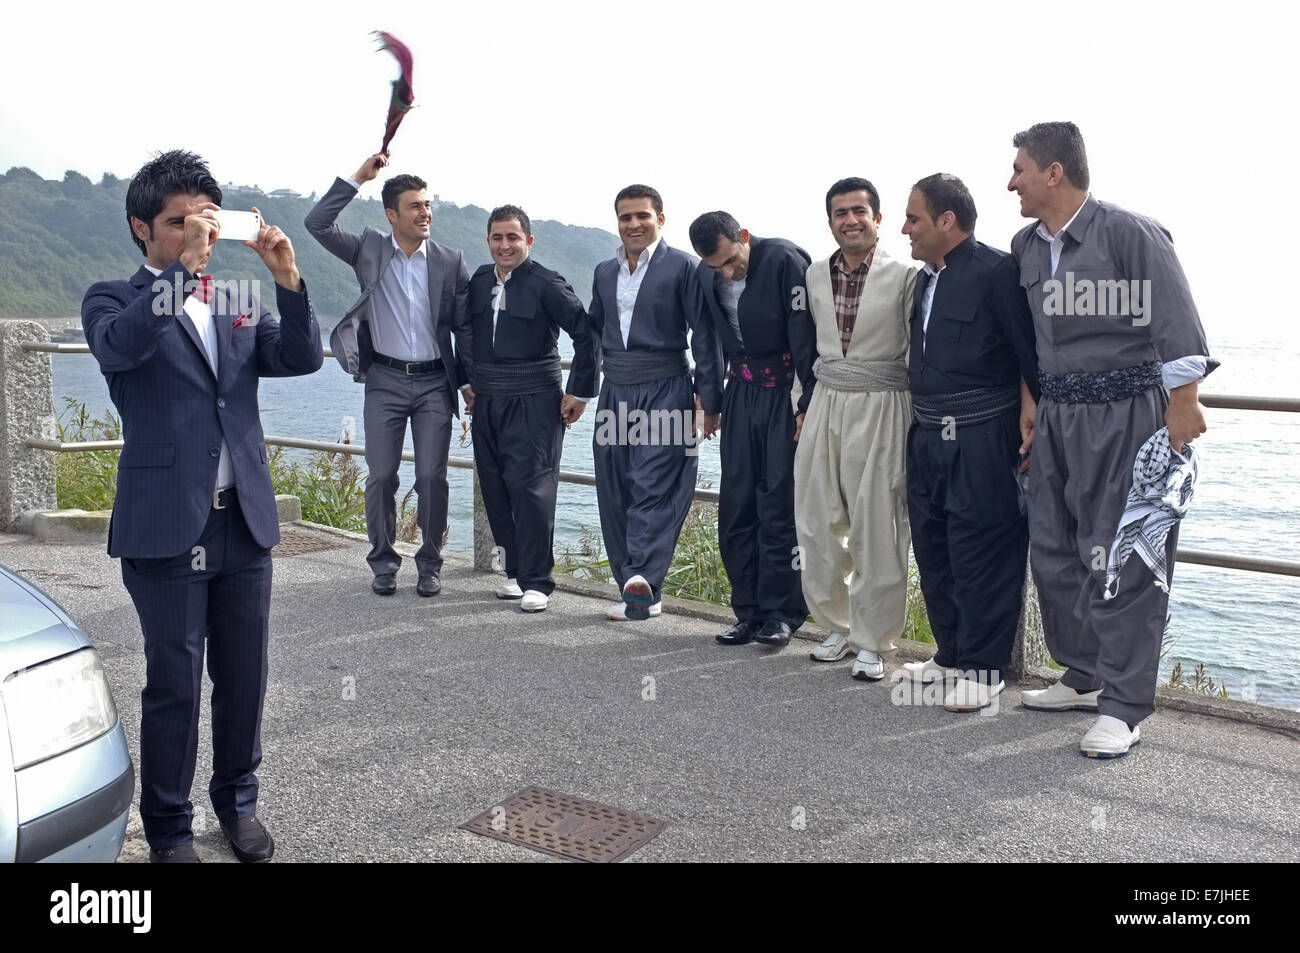 A group of Kurdistani men celebrate their friends forthcoming marriage. Groom is the furthest right in this picture. Stock Photo